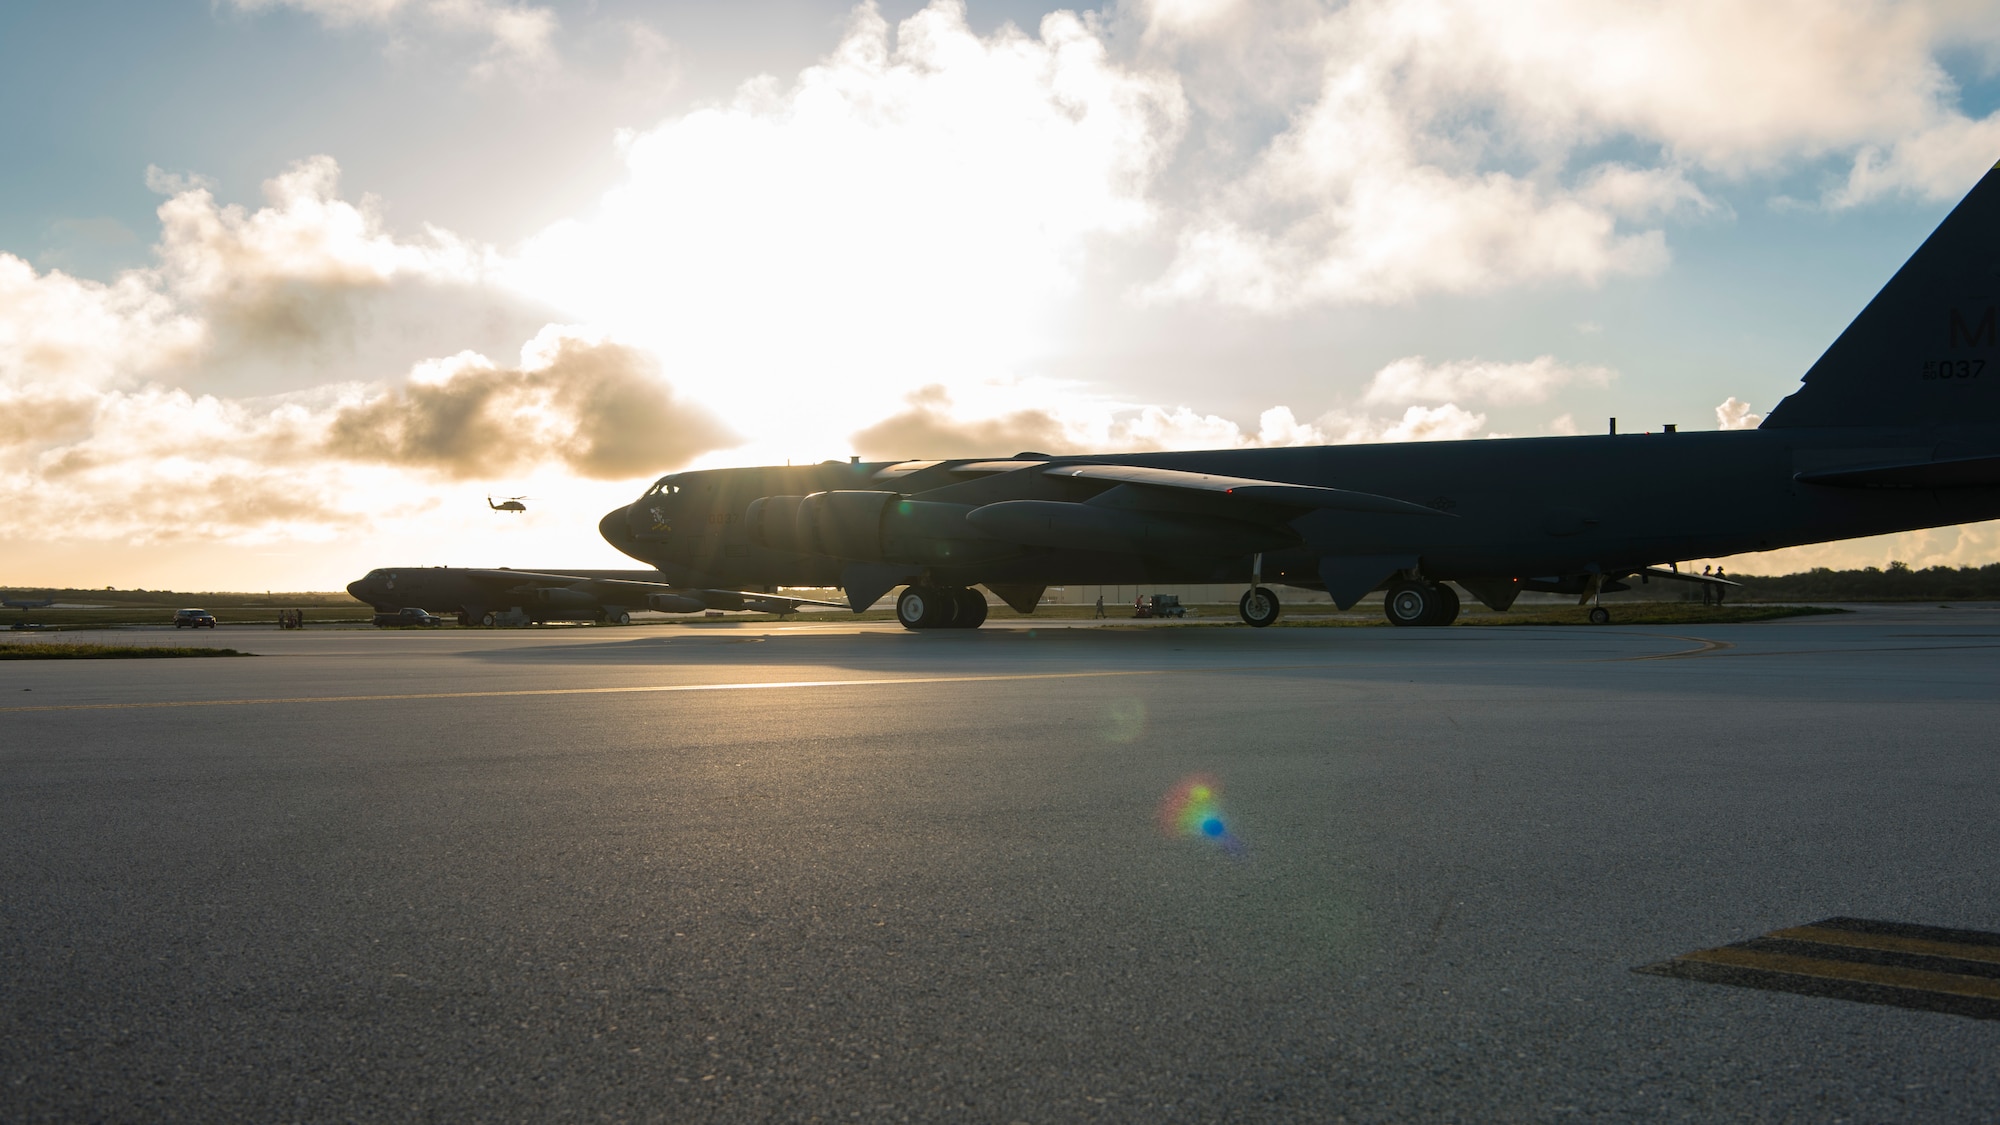 A U.S. Air Force B-52H Stratofortress, assigned to the 23rd Expeditionary Bomb Squadron (EBS), taxis on the flightline at Andersen Air Force Base, Guam, May 15, 2019. 23rd EBS Airmen and aircraft participated in exercise Northern Edge 2019, a joint training exercise that prepares U.S. military personnel to respond to crises in the Indo-Pacific region. (U.S. Air Force photo by Senior Airman Ryan Brooks)